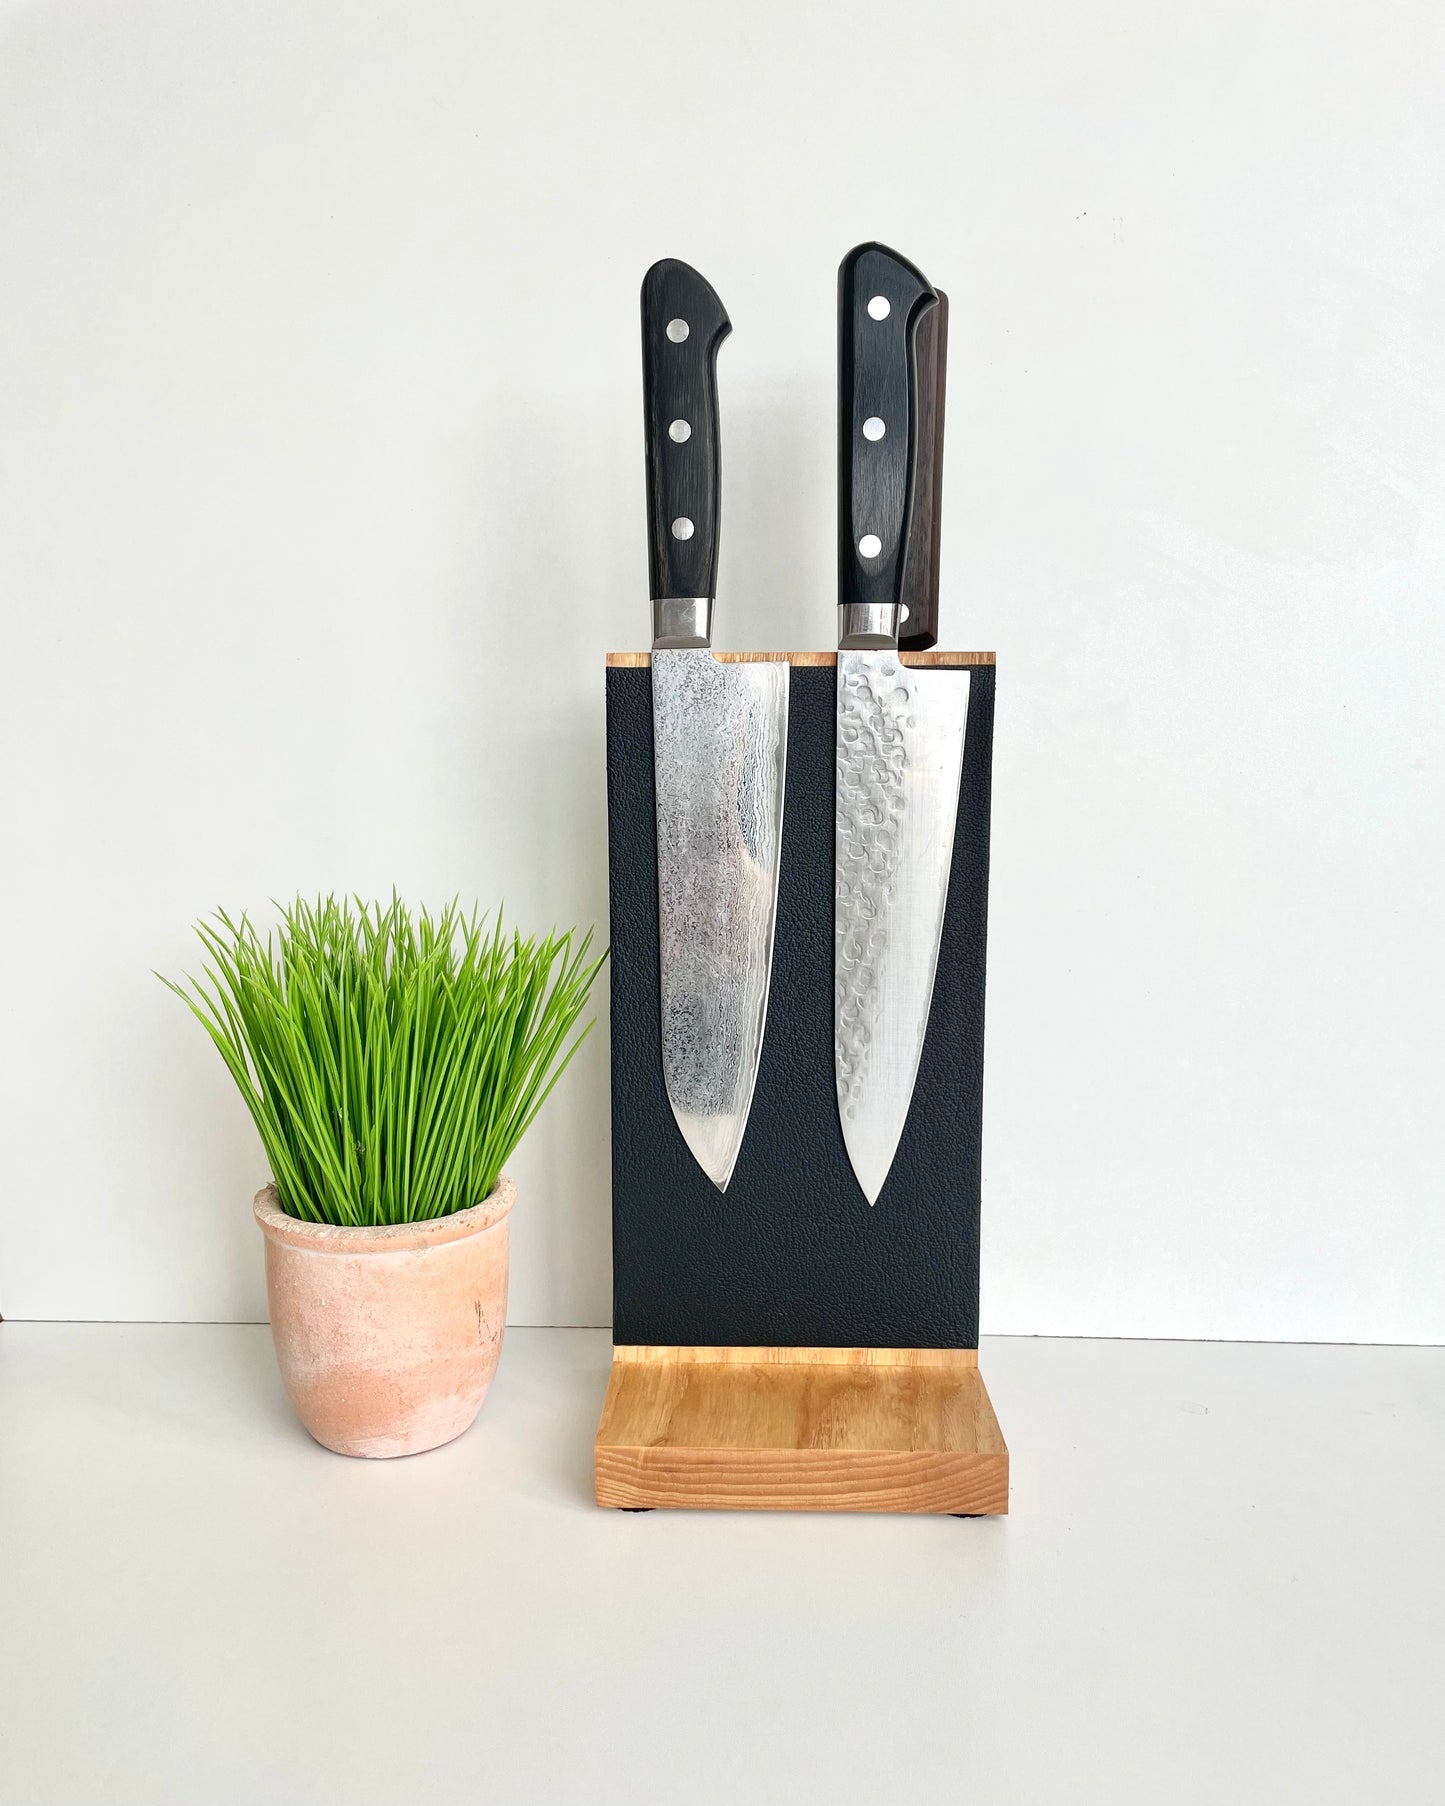 Wooden magnetic knife holder | Knife block wood and leather | Magnetic block up to 4 knives | Wooden block